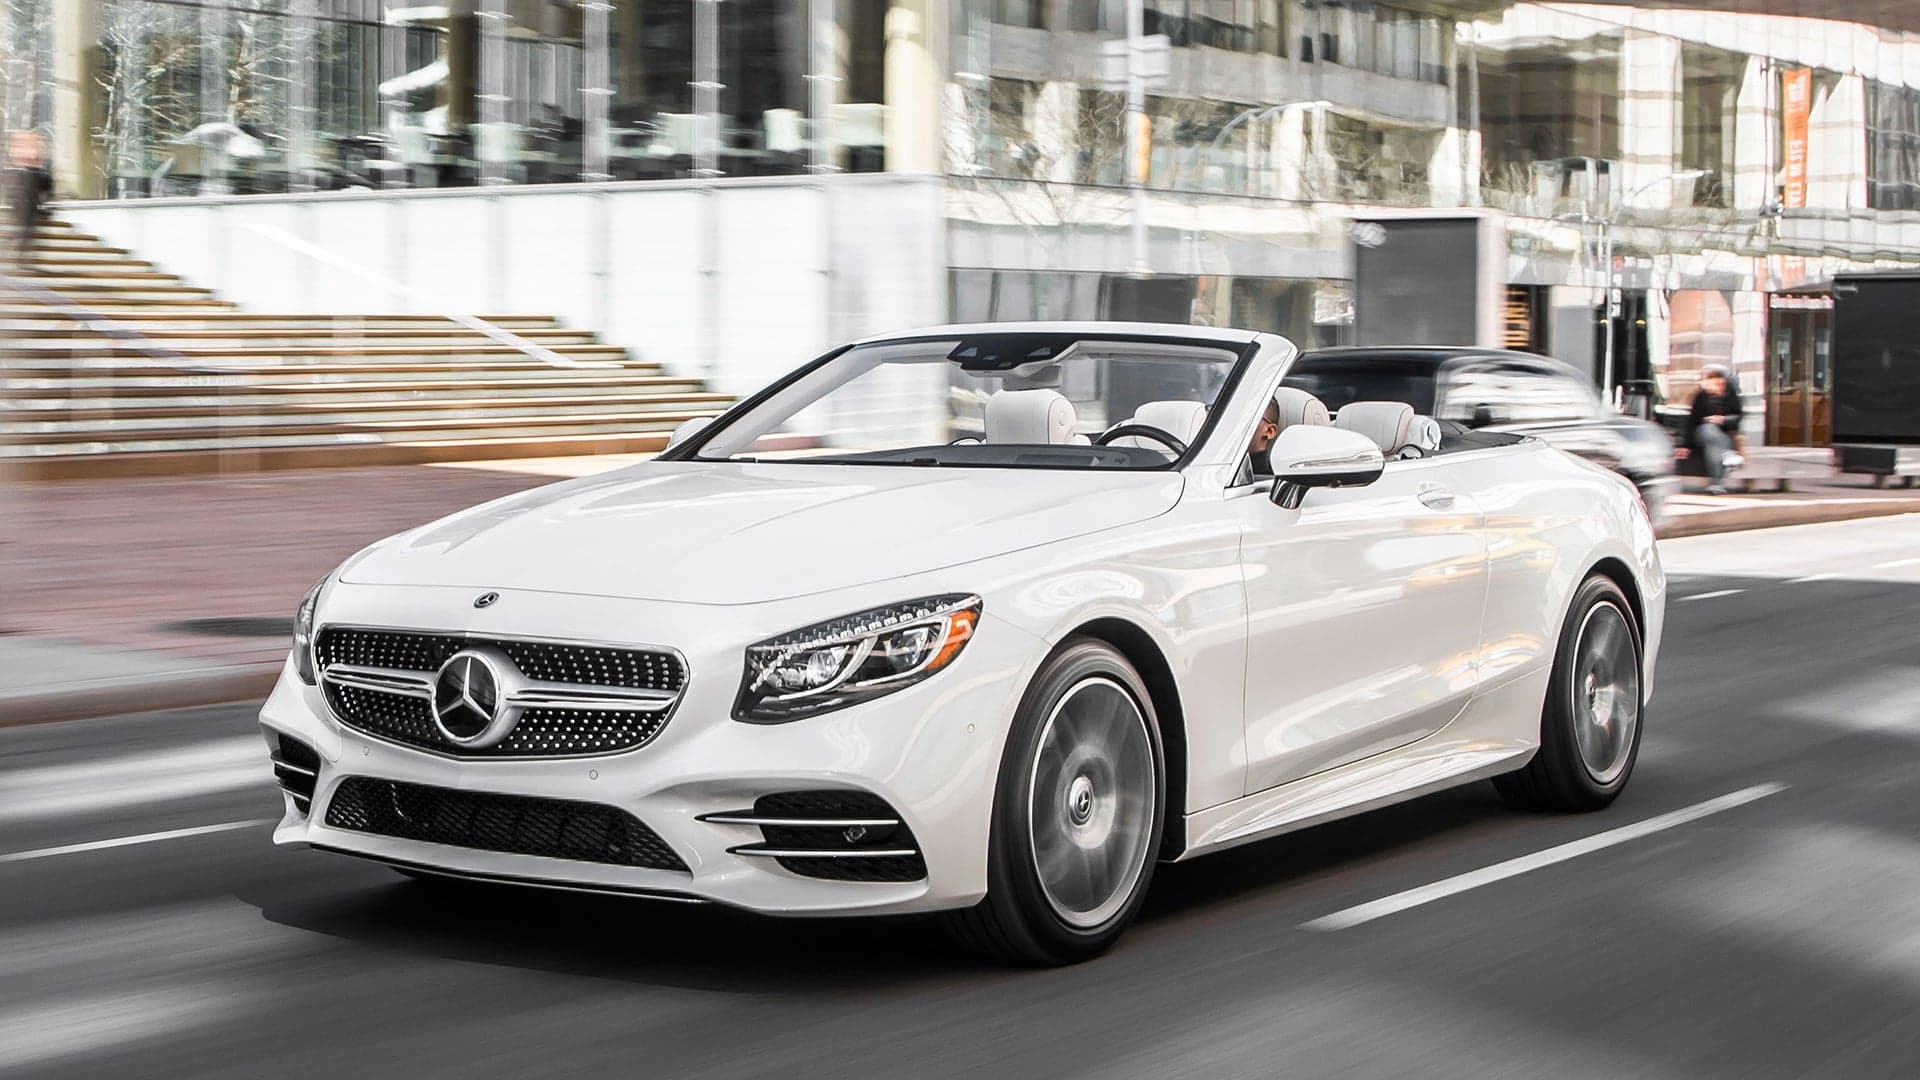 2018 Mercedes-Benz S560 Cabriolet New Dad Review: Teaching Kids the Value of a Dollar